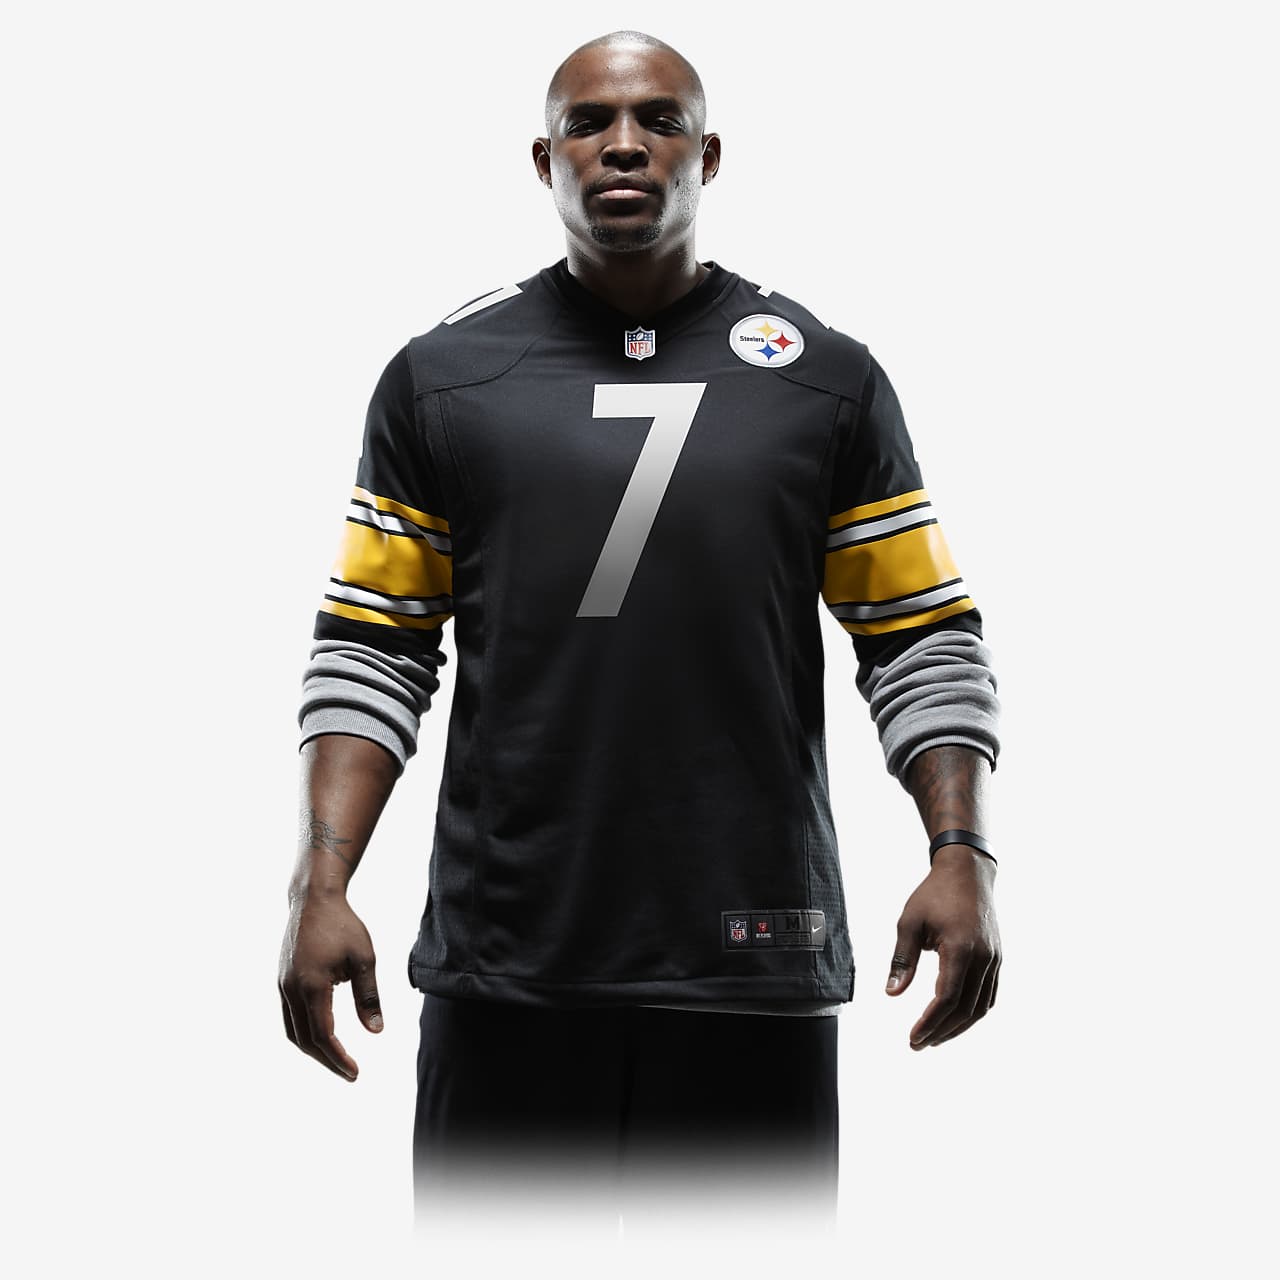 Mount Bank Applied Pay tribute NFL Pittsburgh Steelers (Ben Roethlisberger) Men's Game Football Jersey.  Nike.com